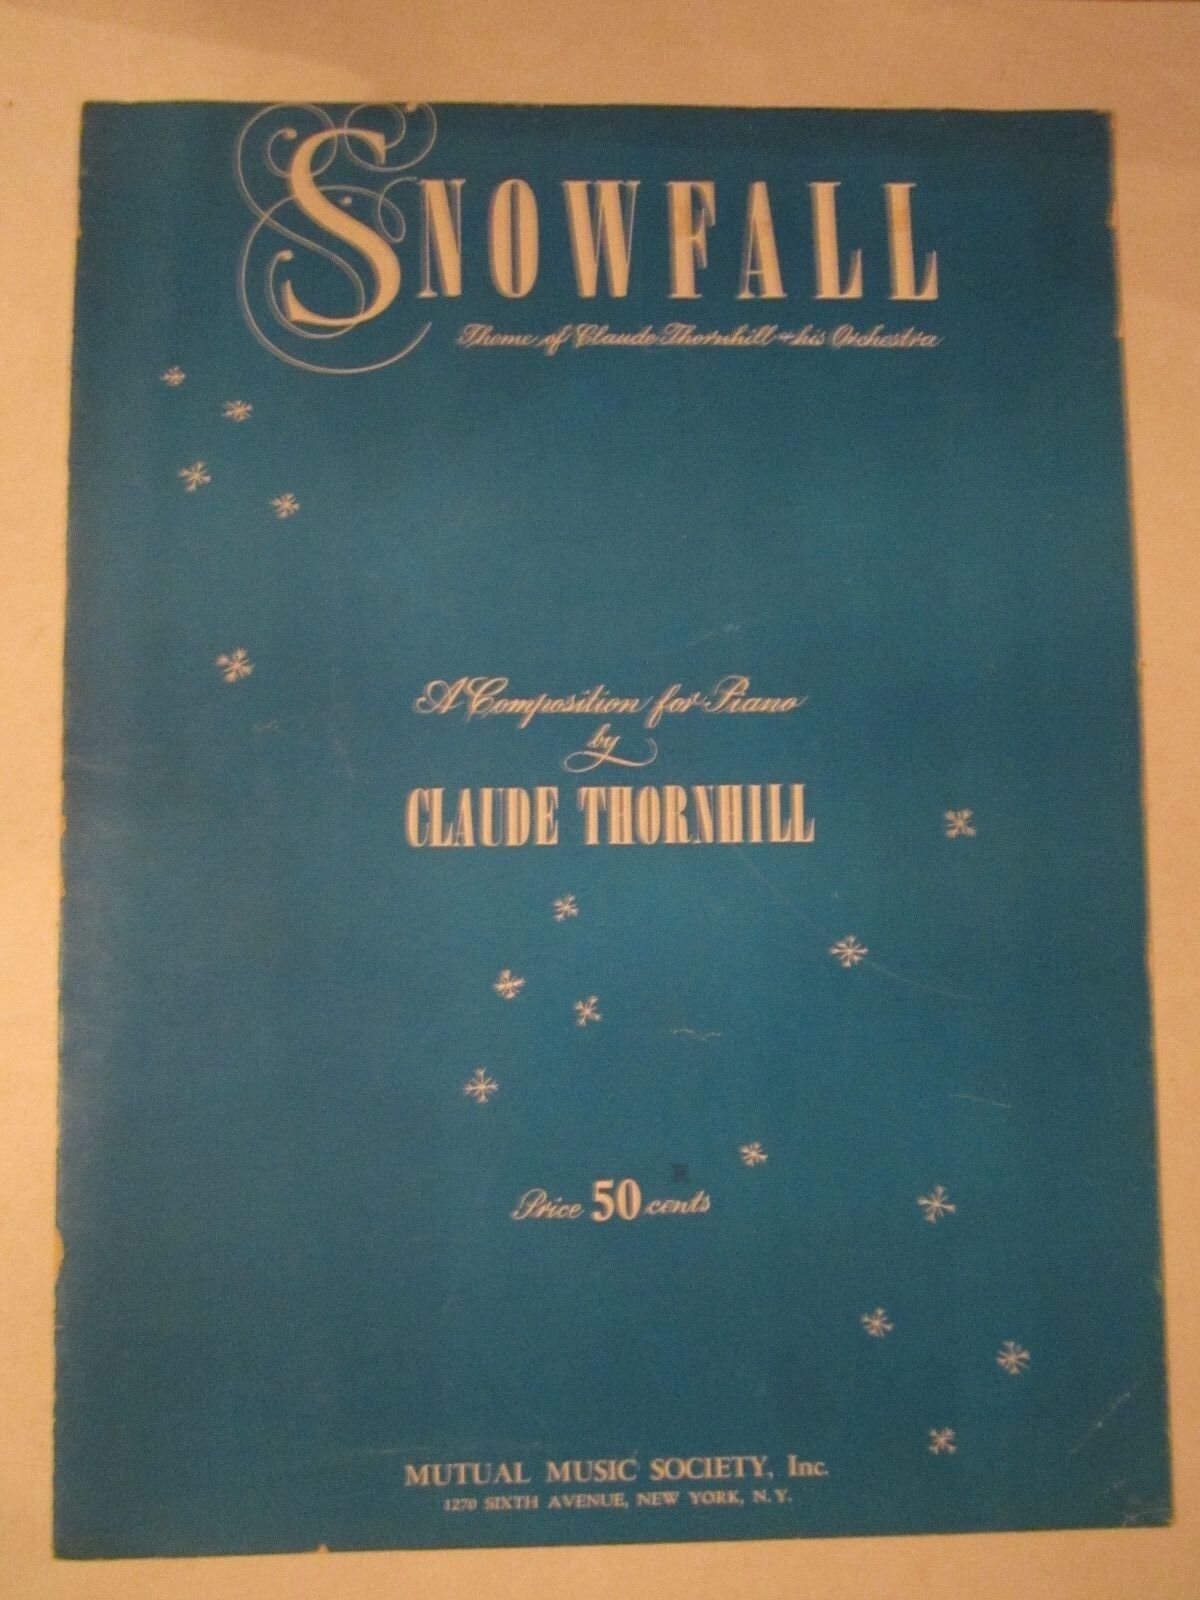 12 VINTAGE MUSIC SHEETS - MOSTLY COVERS WITH SOME MUSIC - #3 - TUB BN-14